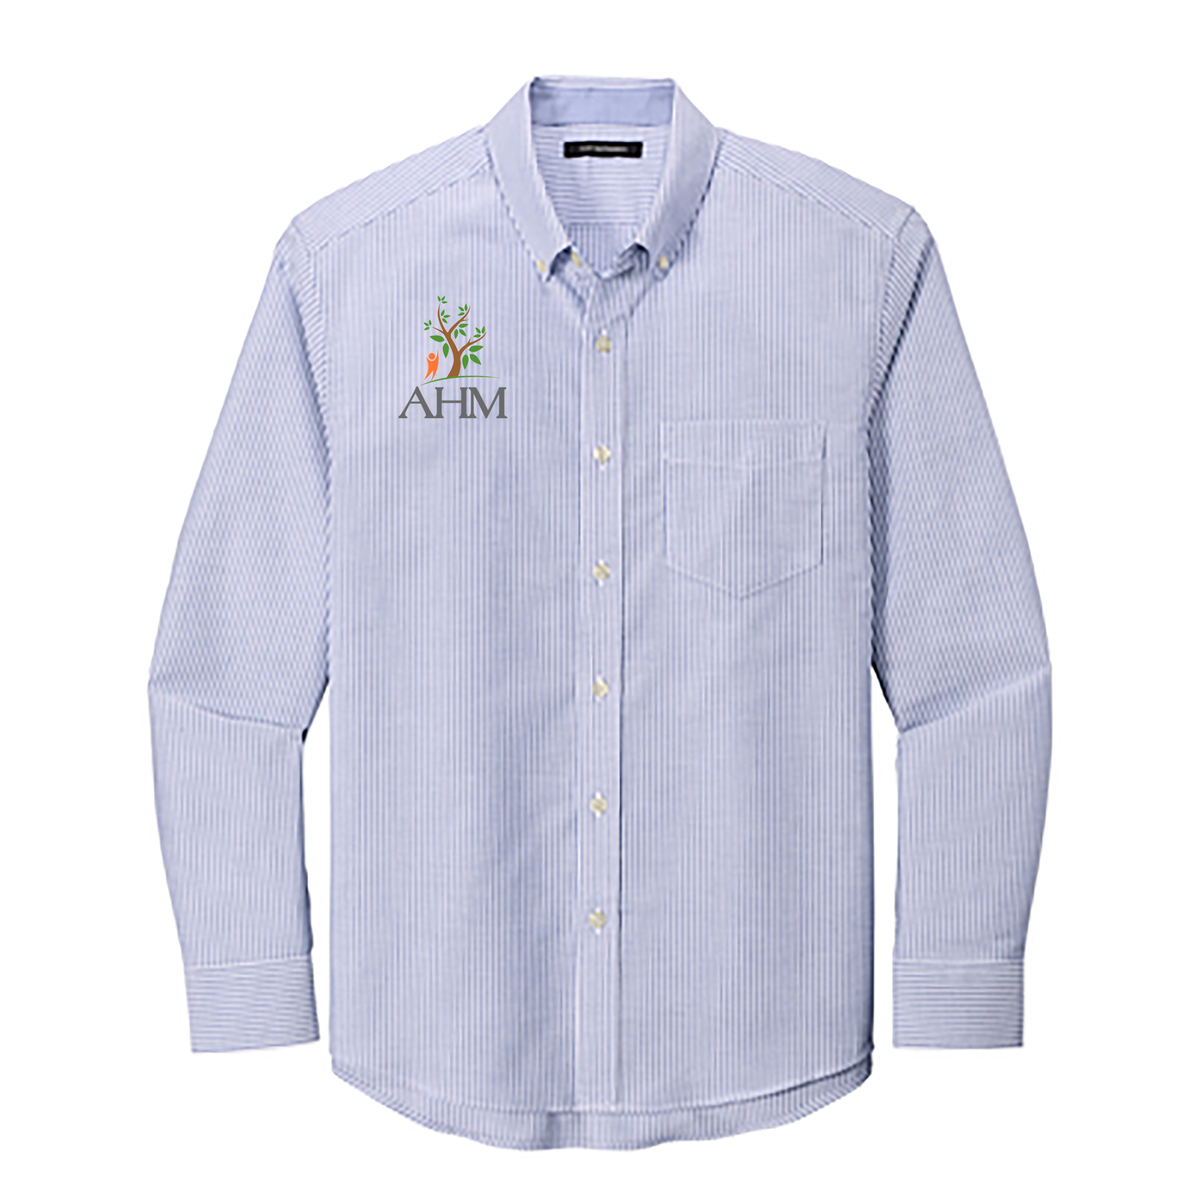 AHM Youth & Family Services SuperPro Oxford Stripe Shirt